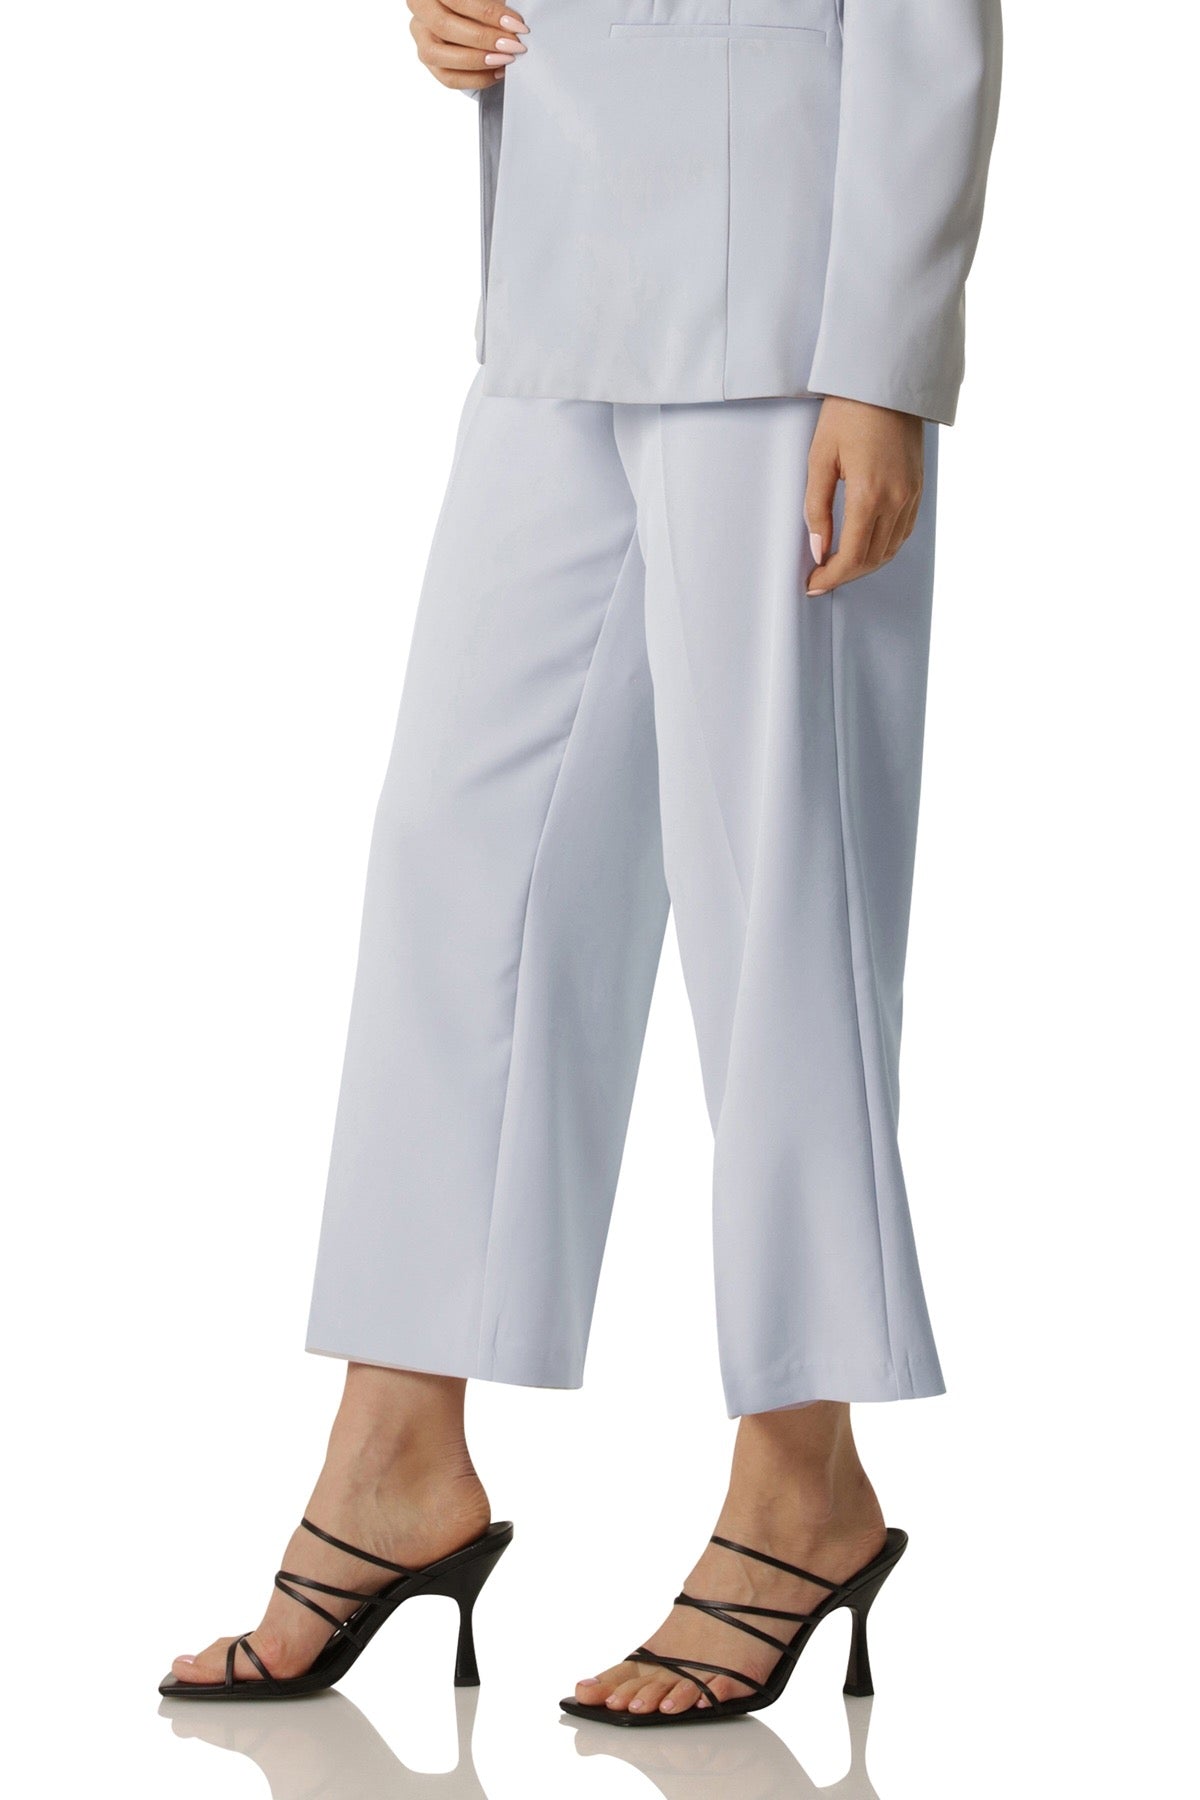 Straight leg cropped flare trouser sky blue - women's figure flattering casual to dressy trousers pants by Avec Les Filles